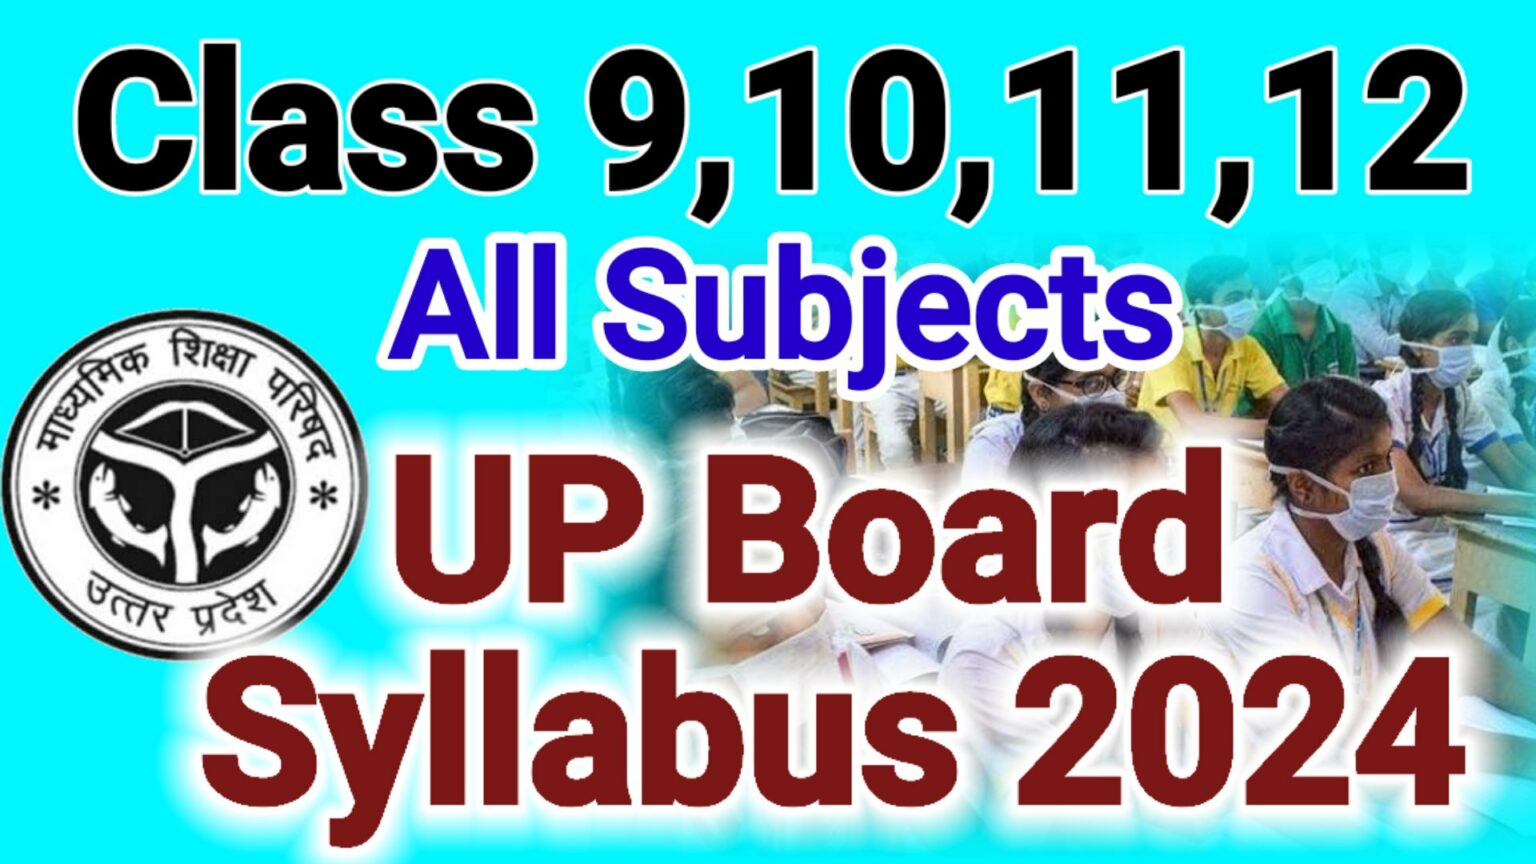 UP Board Syllabus 202324 for Class 9, 10, 11 and Class 12 Latest